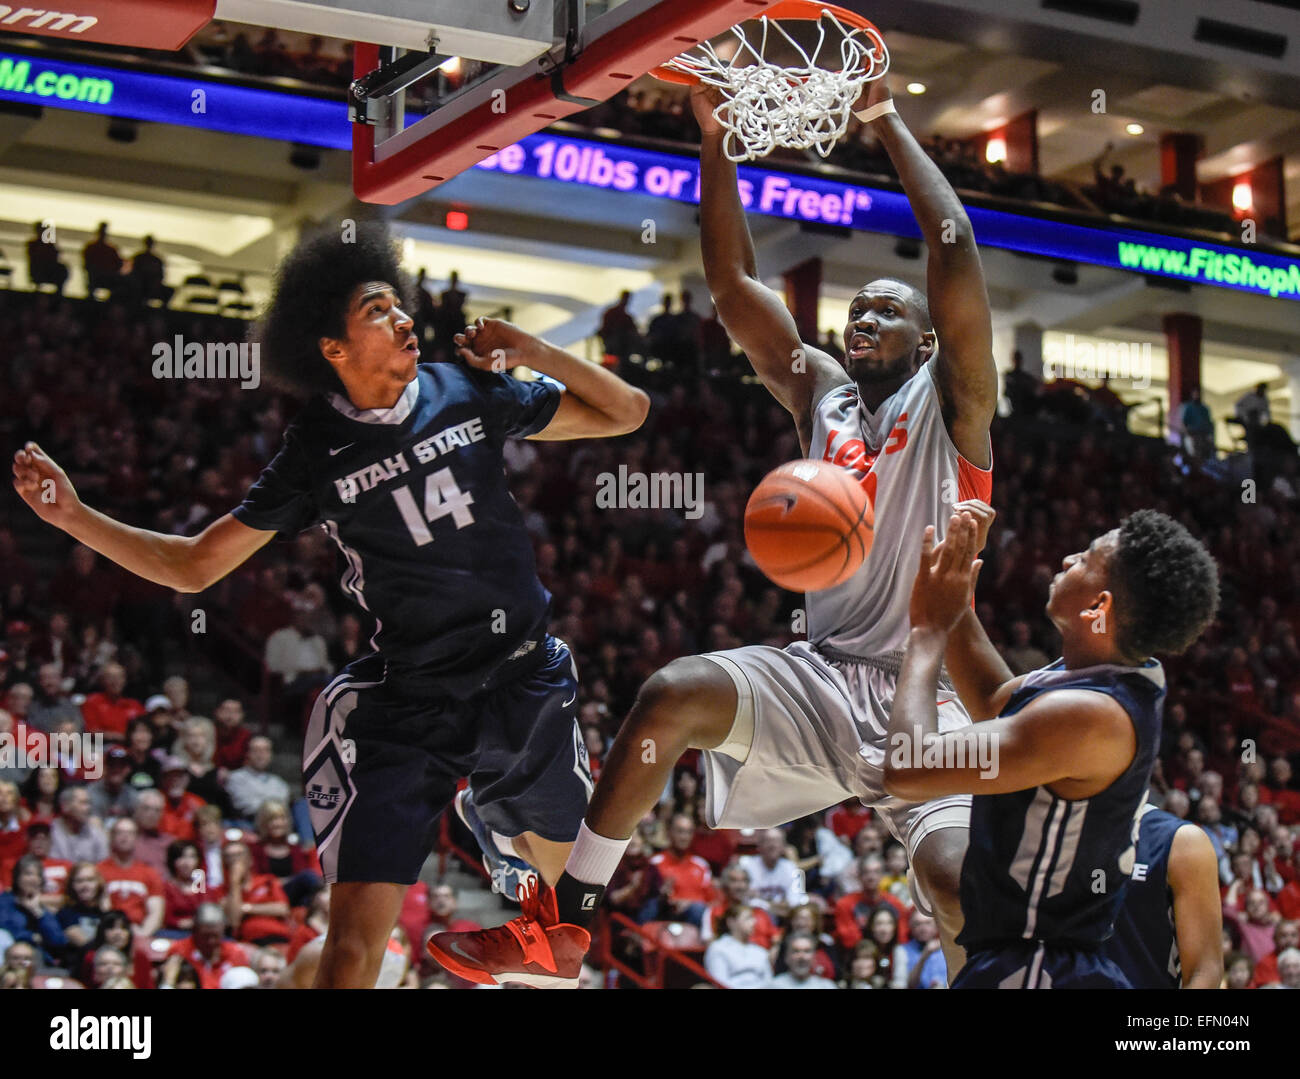 Albuquerque, New Mexico, USA. 7th Feb, 2015. Roberto E. Rosales.UNM's J.J. N'Ganga(Cq), center, dunks over Utah State's Jalen Moore(Cq), left, and Chris Smith(Cq), right Saturday afternoon at the Pit. Utah State defeated the Lobos 63 to 60. Albuquerque, New Mexico © Roberto E. Rosales/Albuquerque Journal/ZUMA Wire/Alamy Live News Stock Photo